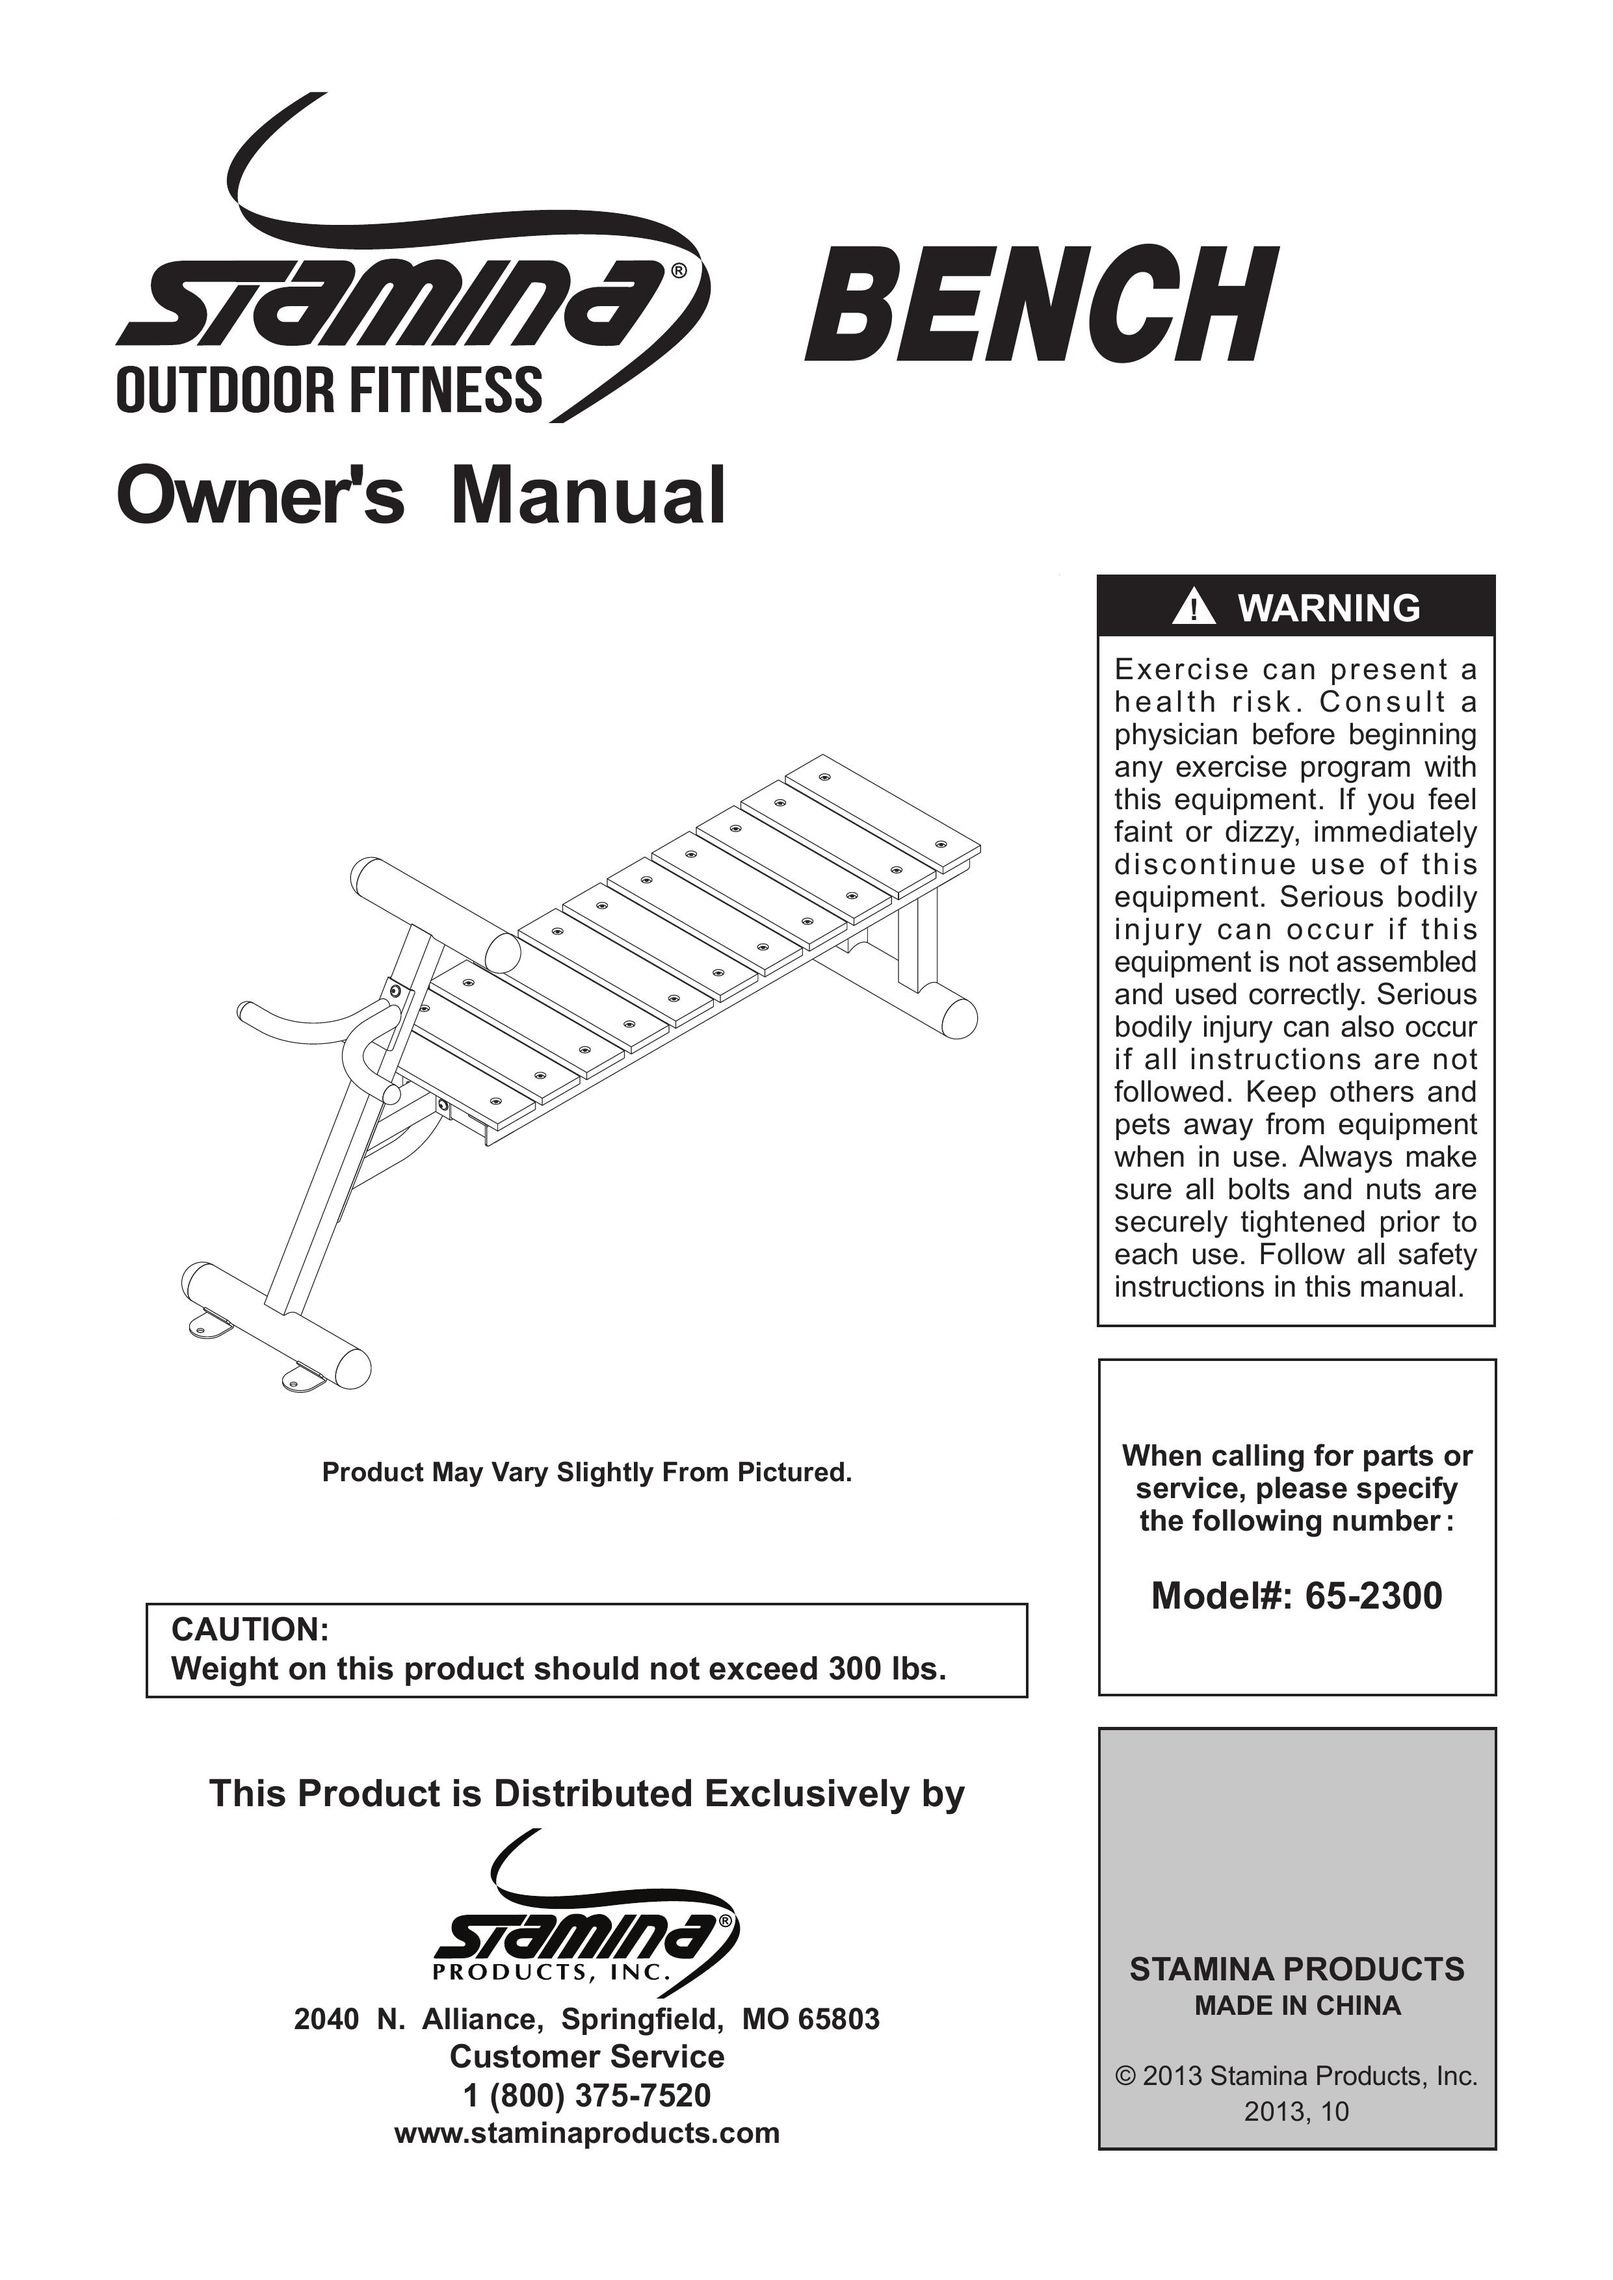 Stamina Products 65-2300 Fitness Equipment User Manual